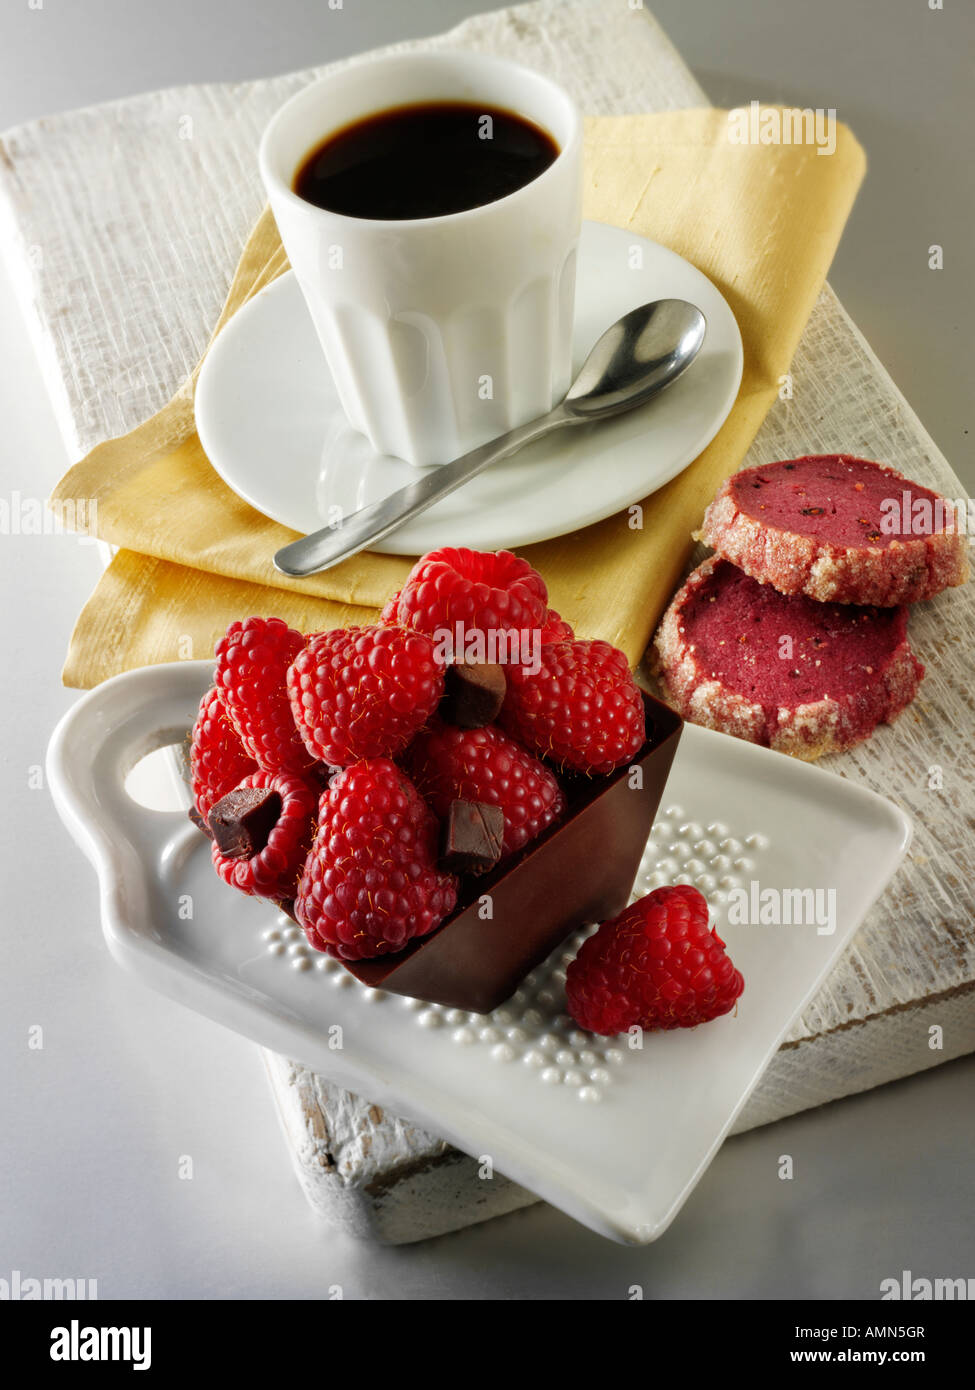 Chocolate cake filled with chocolate topped with fresh raspberries in a cafe setting with coffee Stock Photo